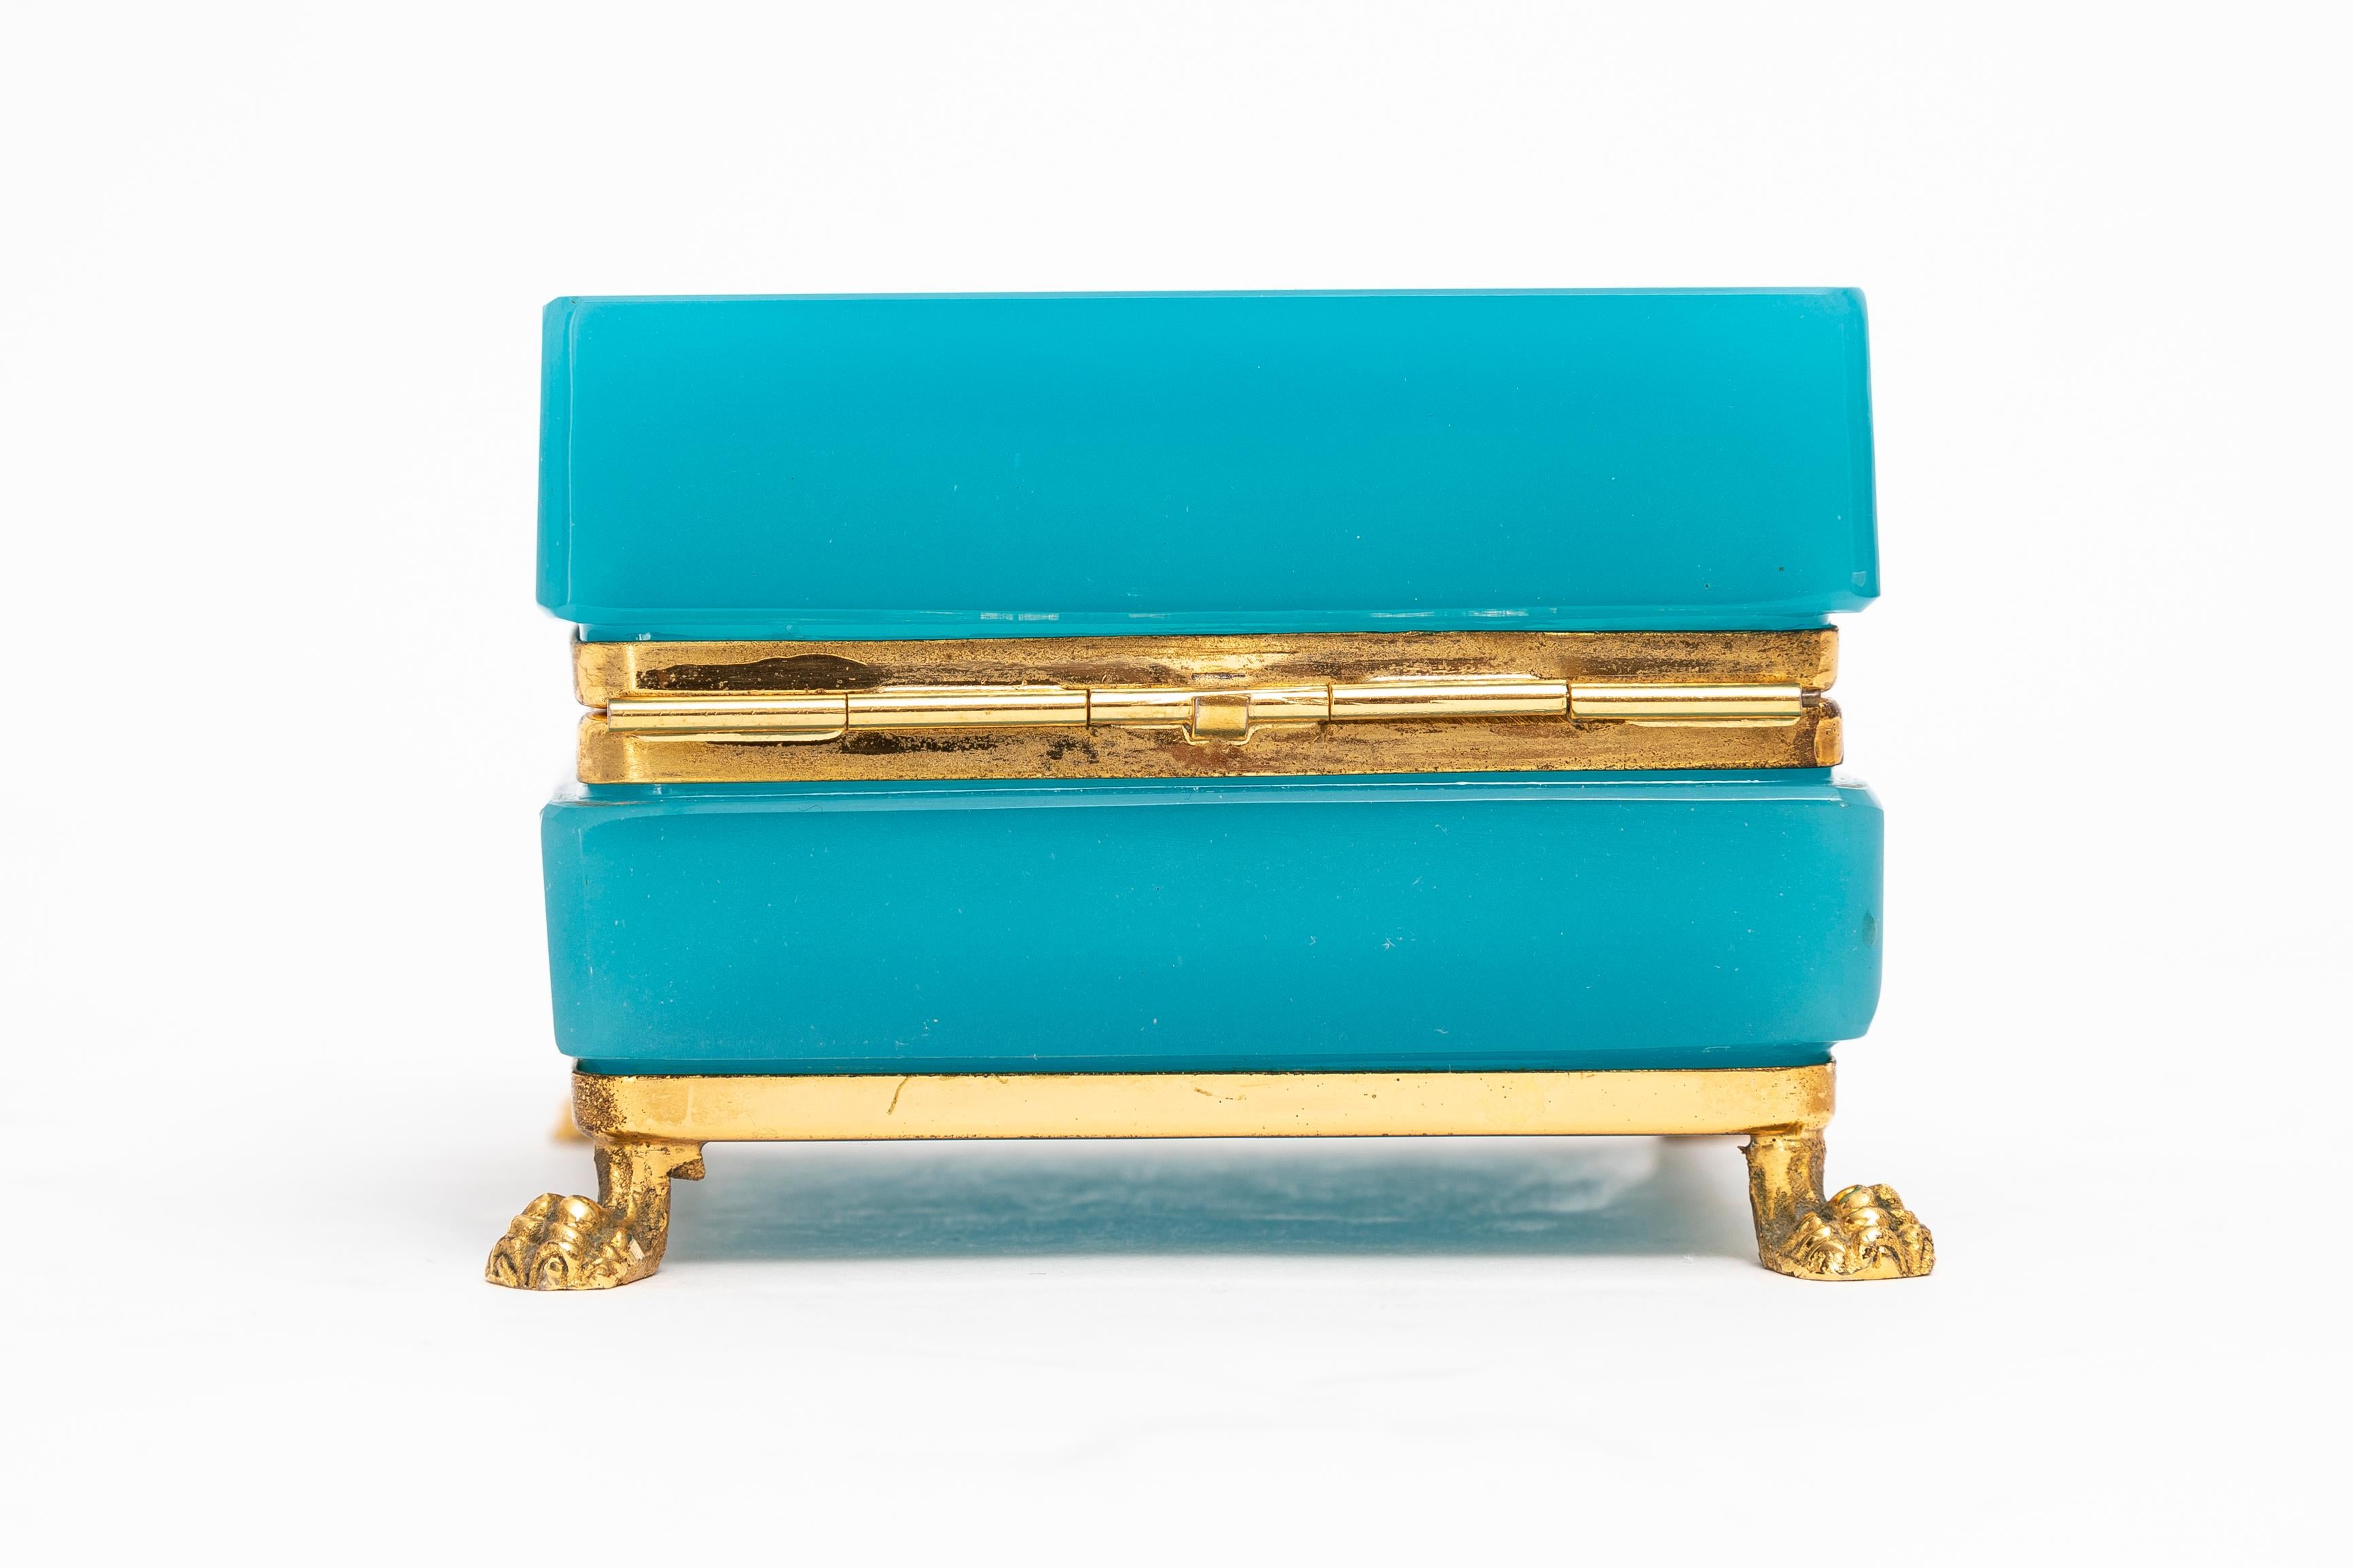 French Mid-Century Mod. Blue Opaline & Dore Bronze Footed Jewel-Box/Tea-Caddy In Good Condition For Sale In New York, NY